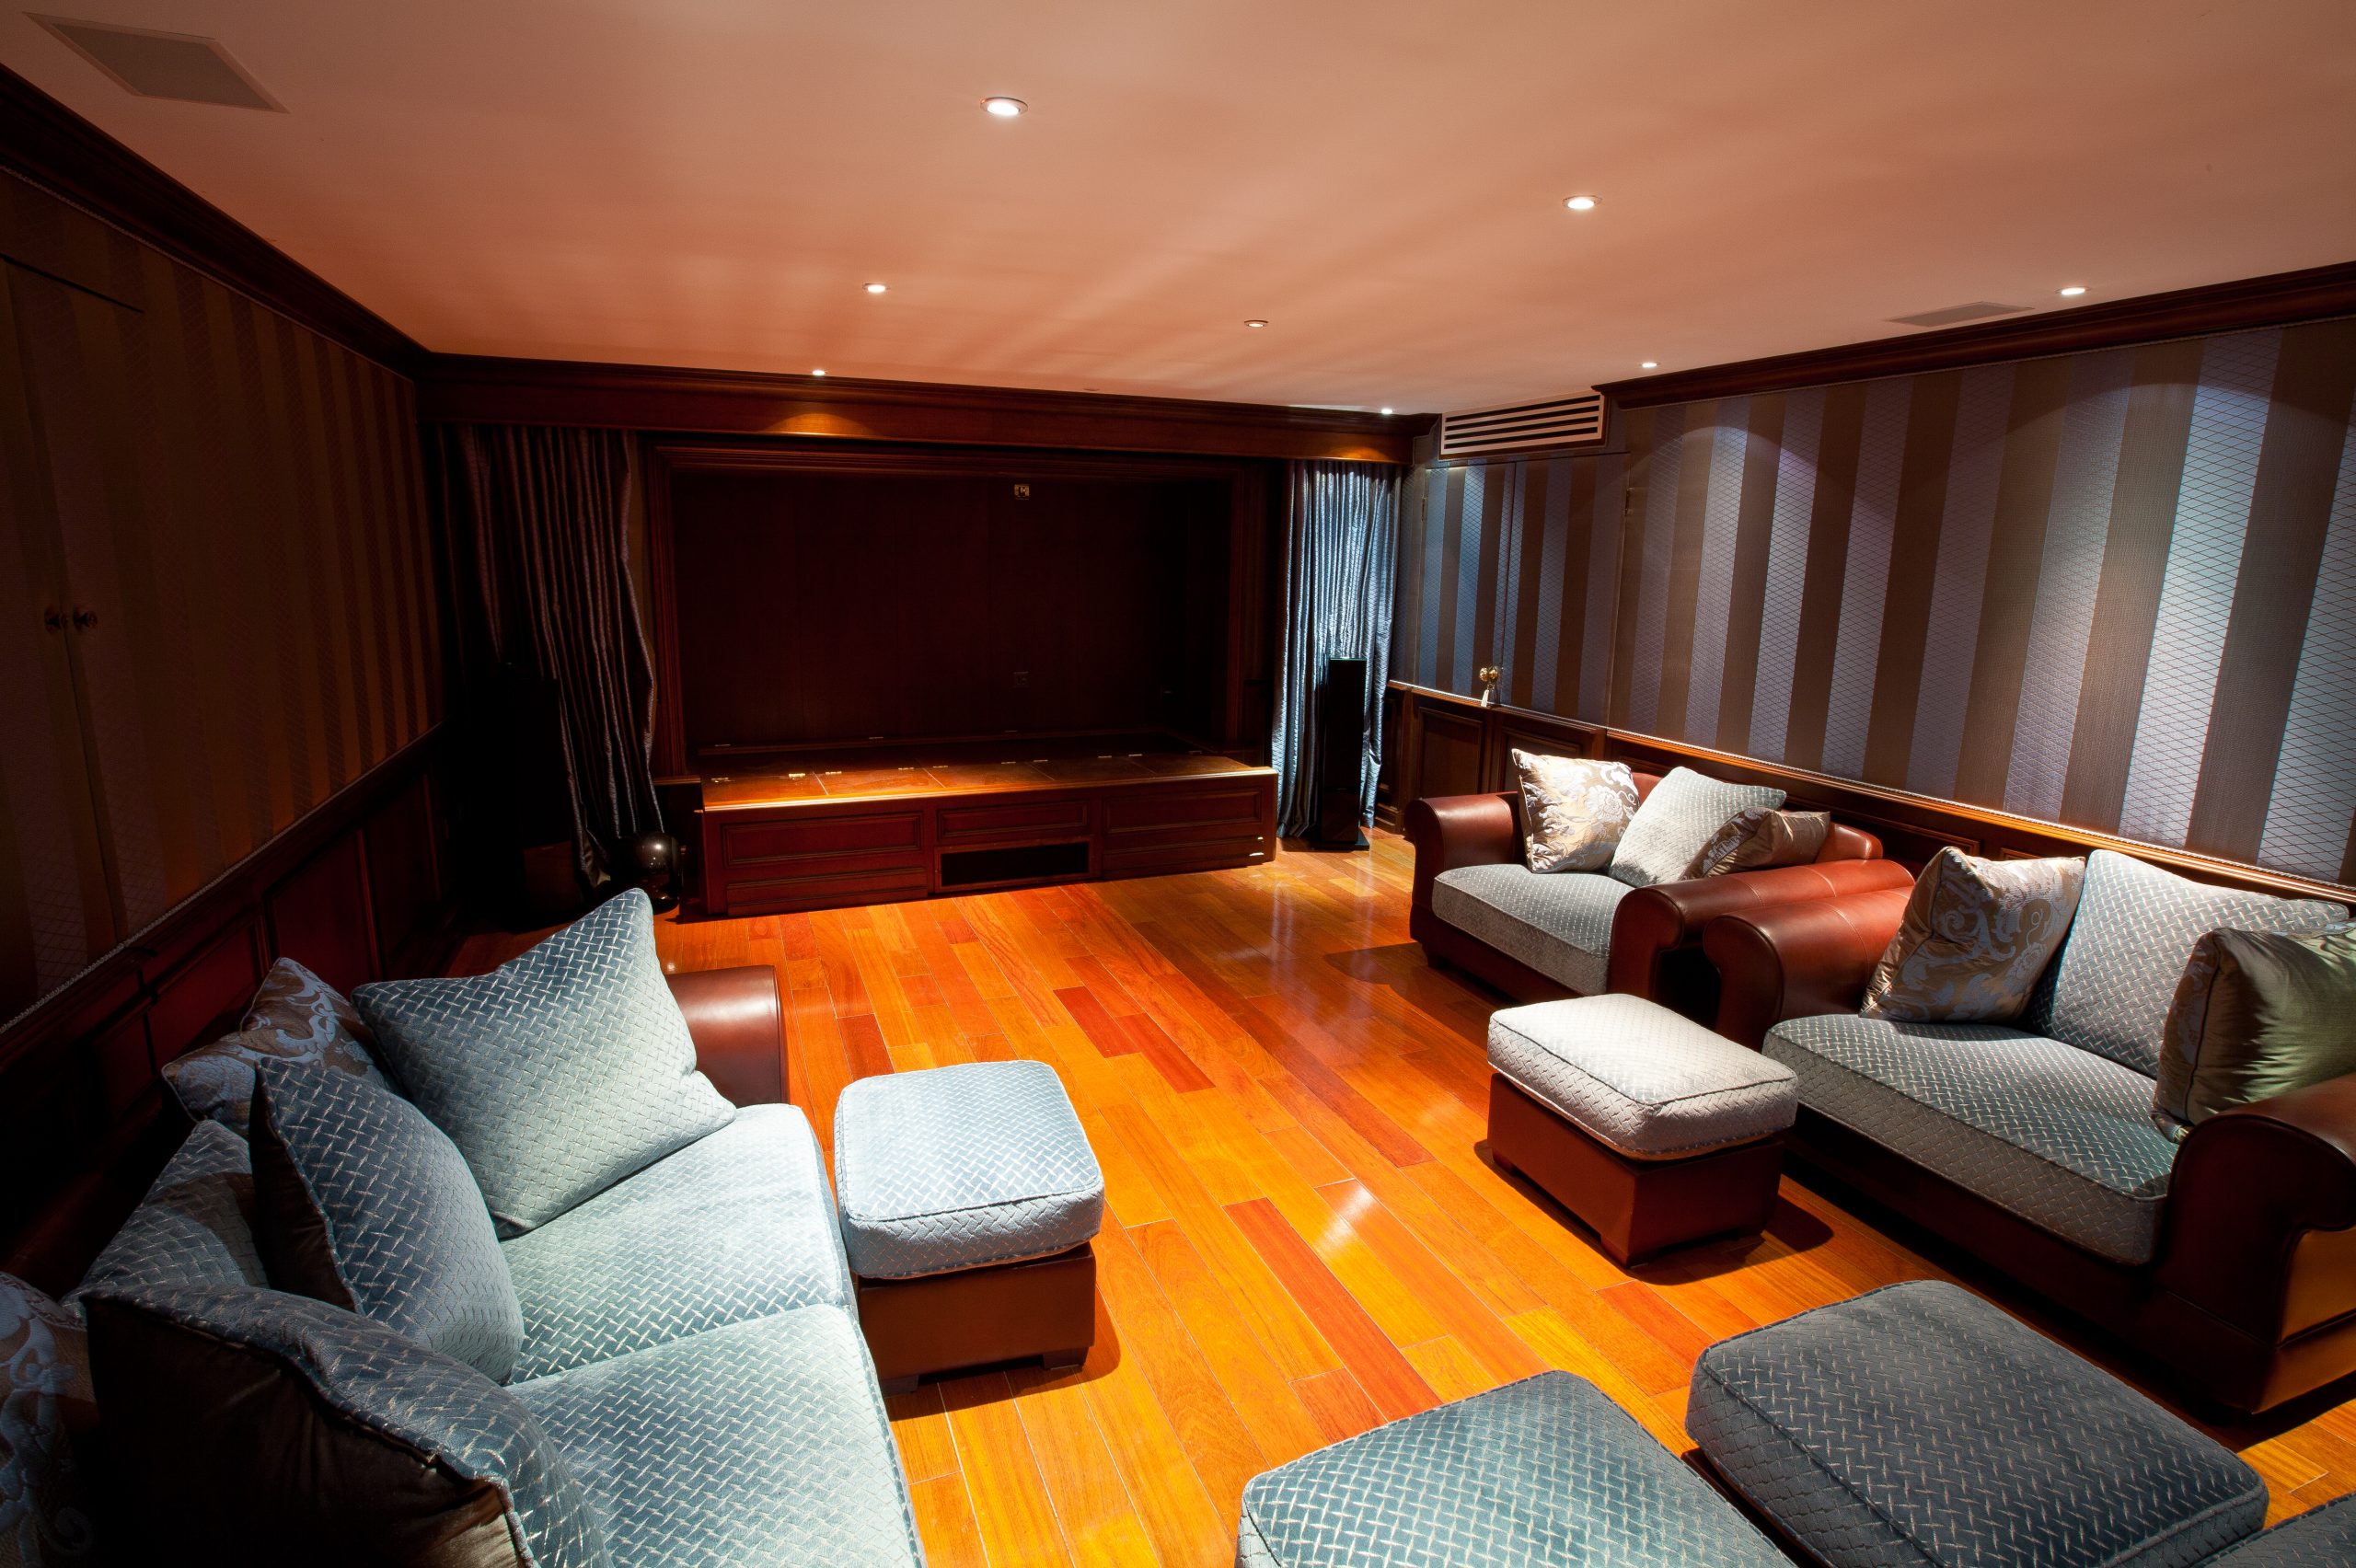 Home cinema room with stage